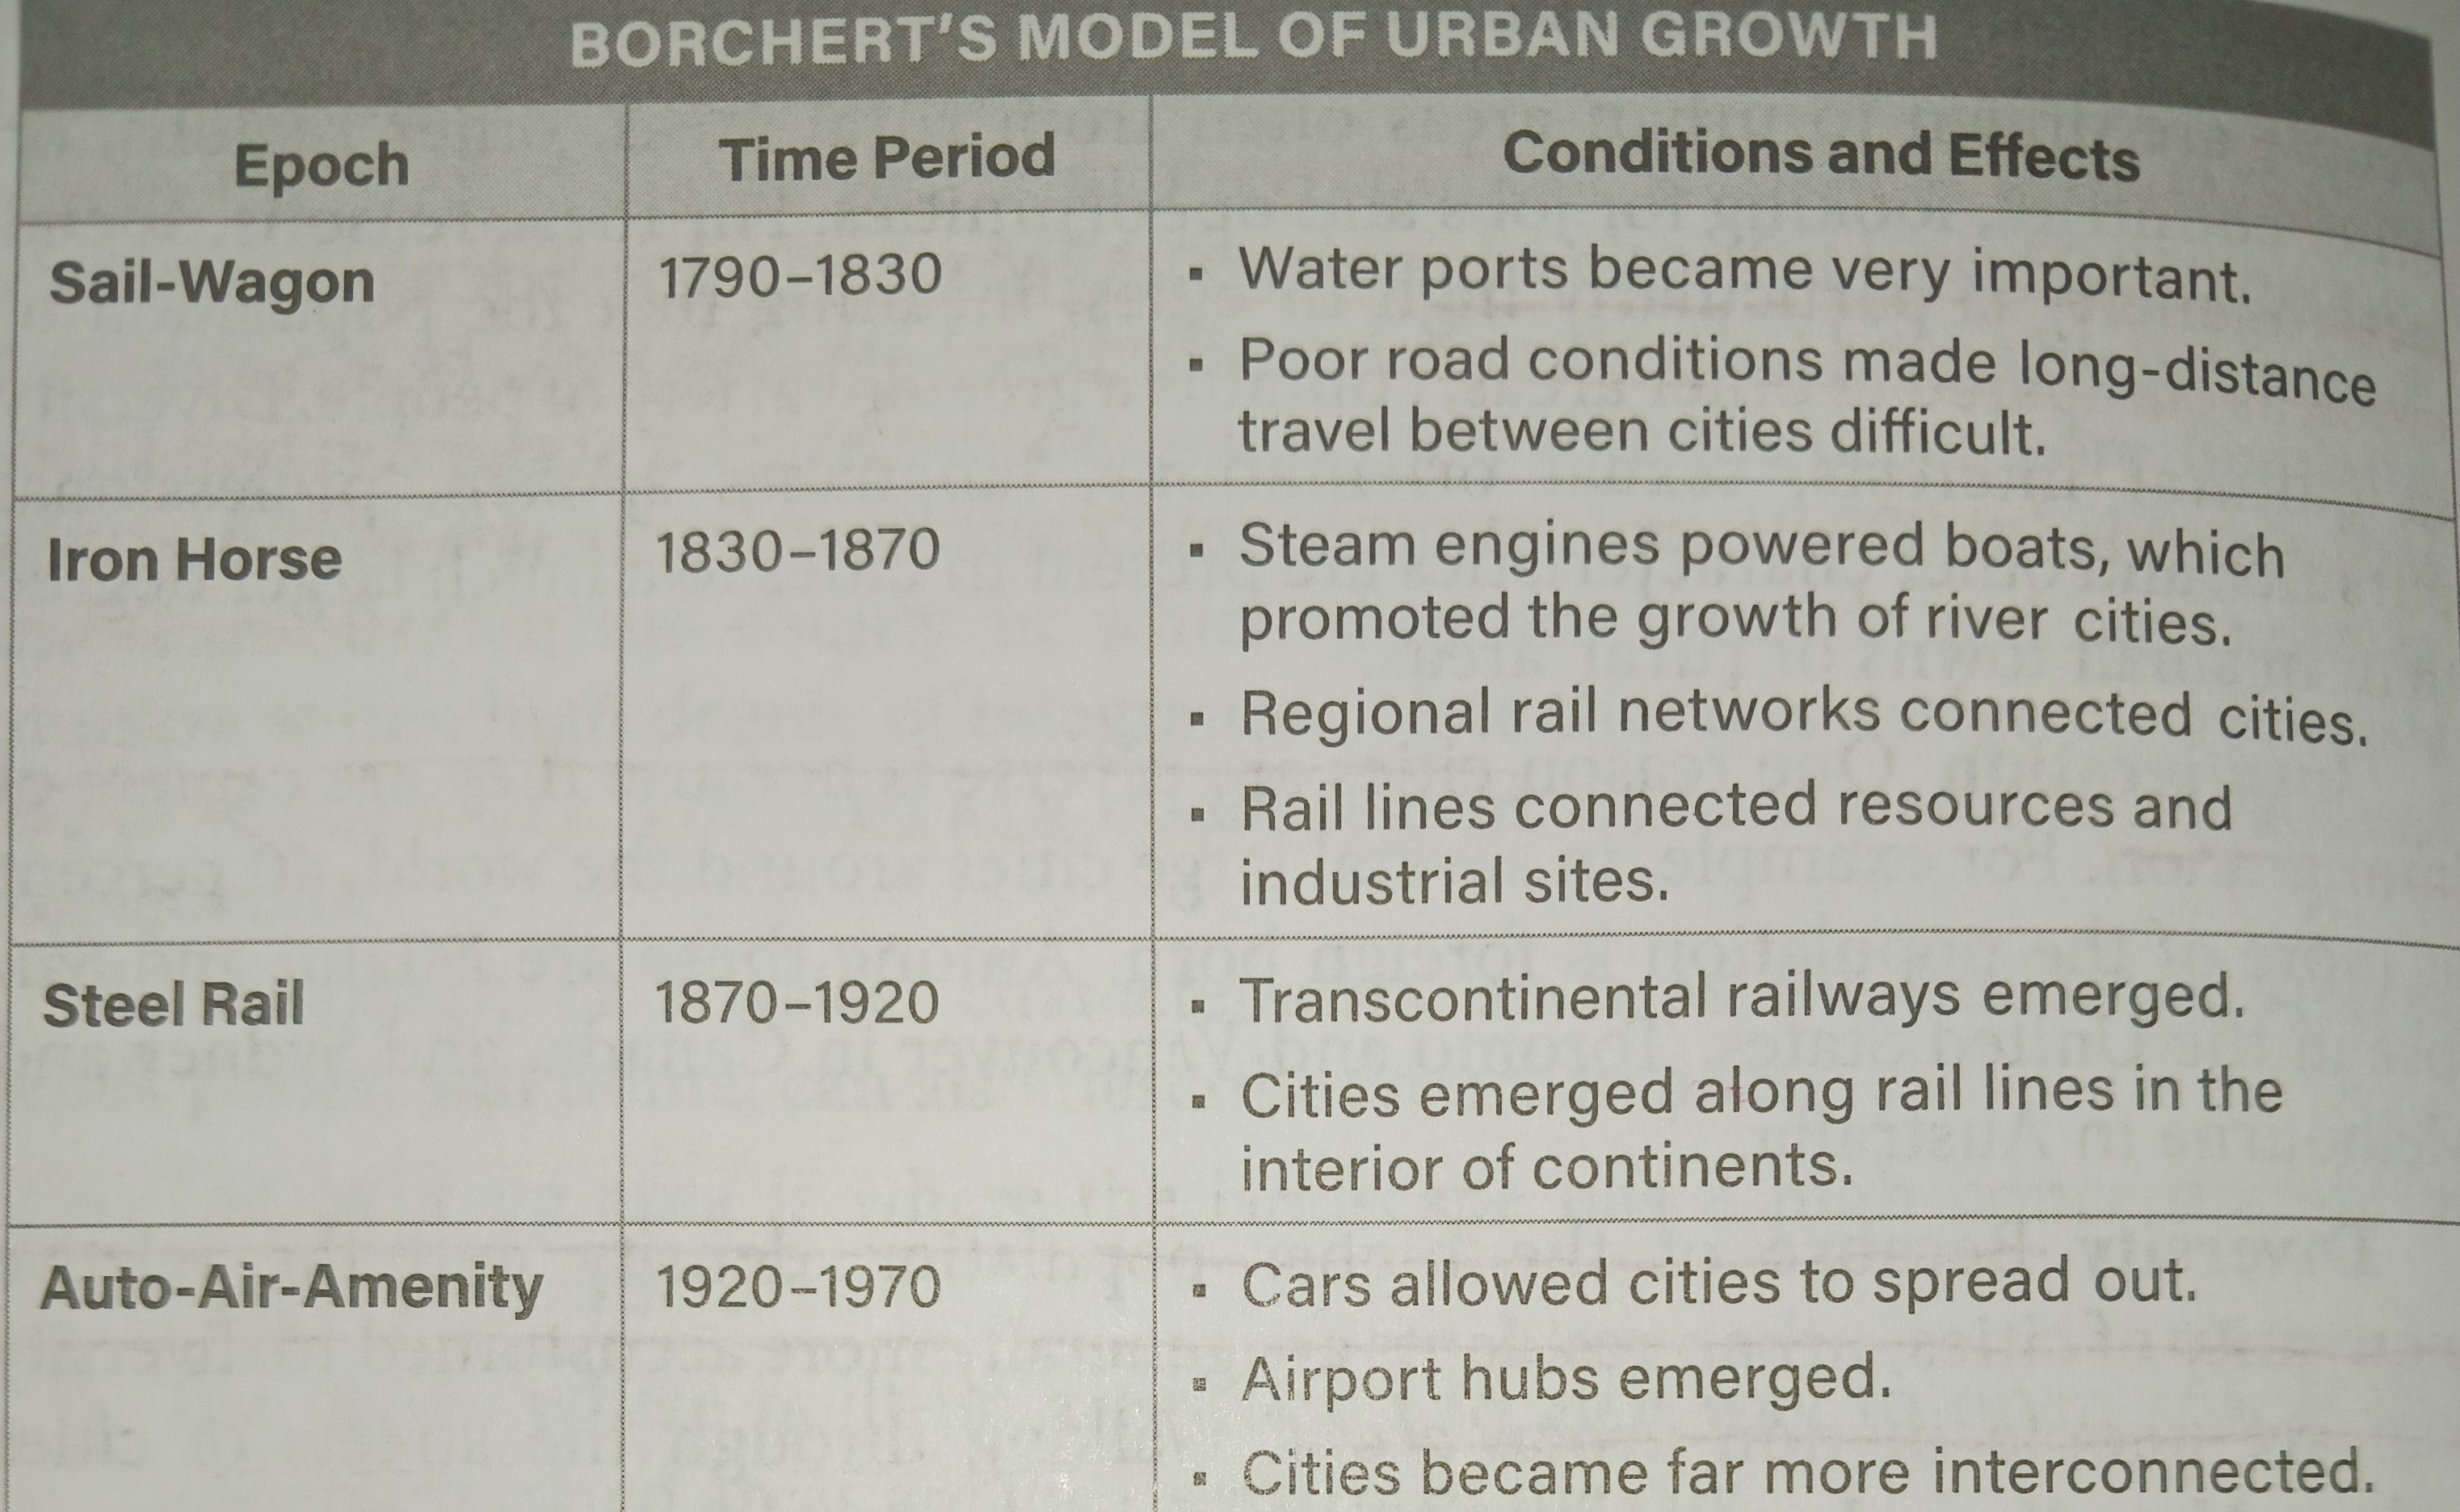 <p><span>Borchert's Epochs of Transportation Growth is a model that categorizes the history of urban development based on changes in transportation technology. It identifies four epochs and explains how transportation advancements shape the expansion of cities.</span></p>